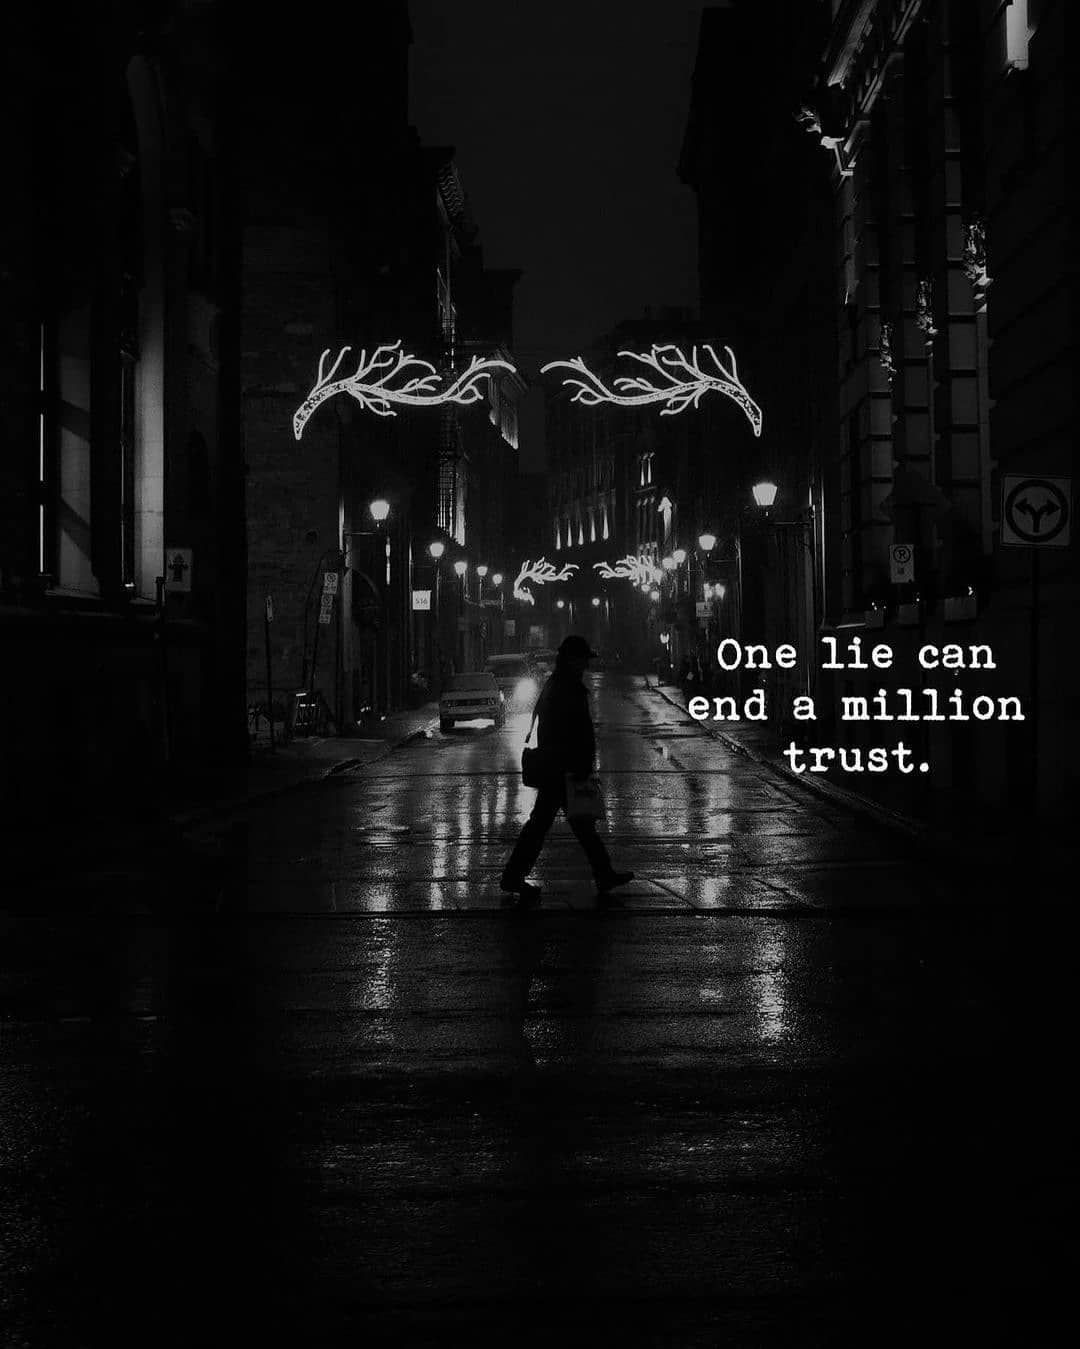 One lie can't end a million trust.